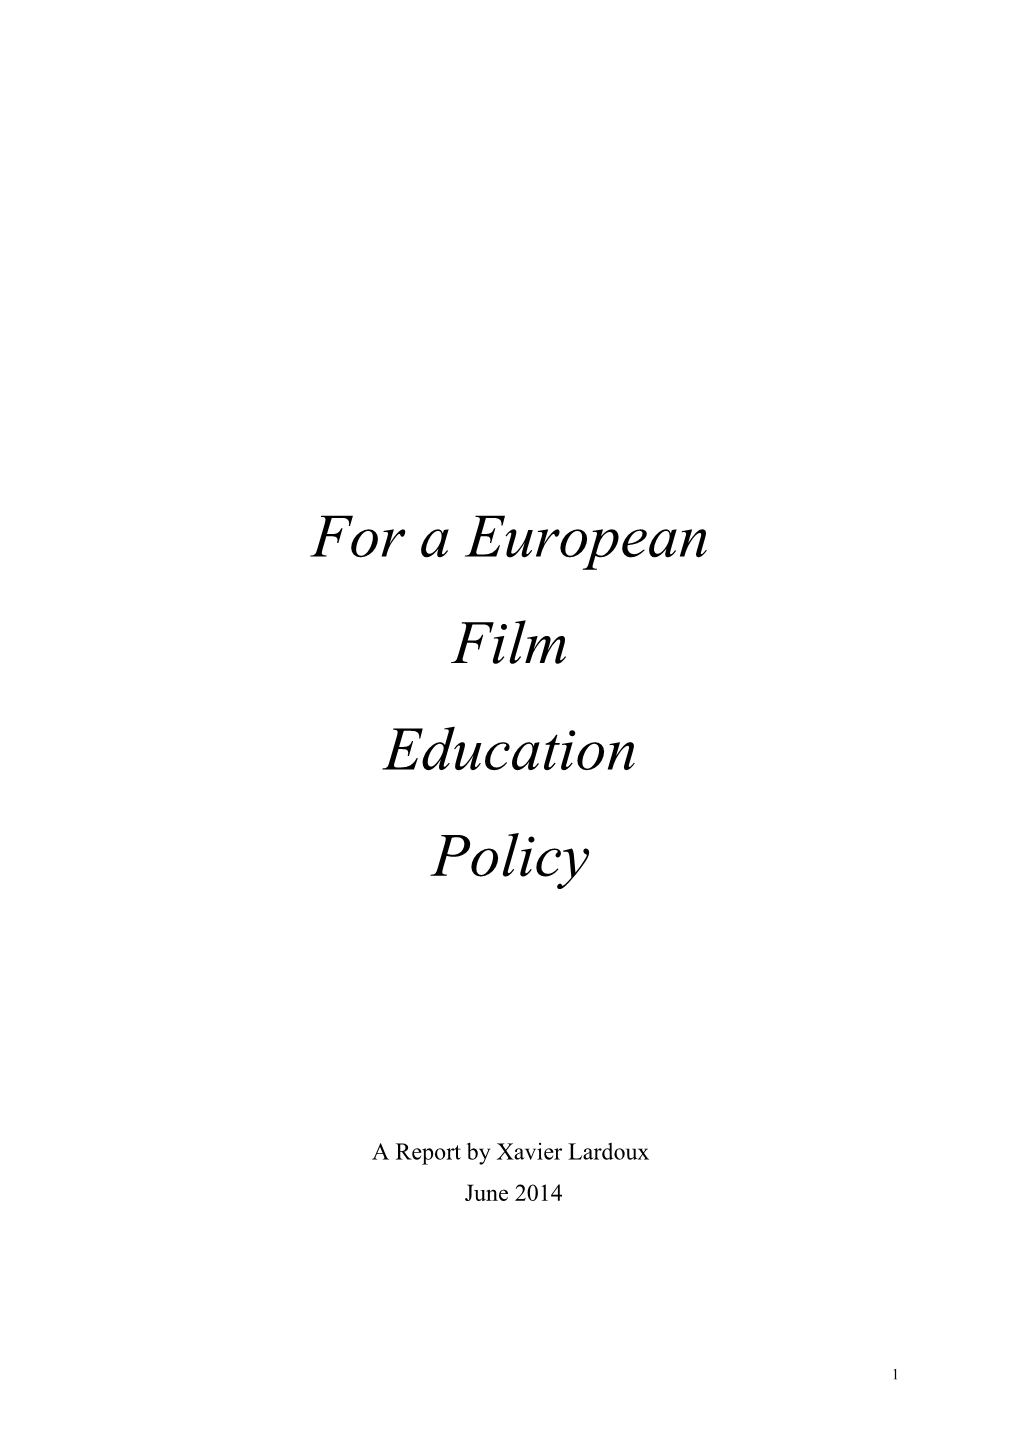 For a European Film Education Policy